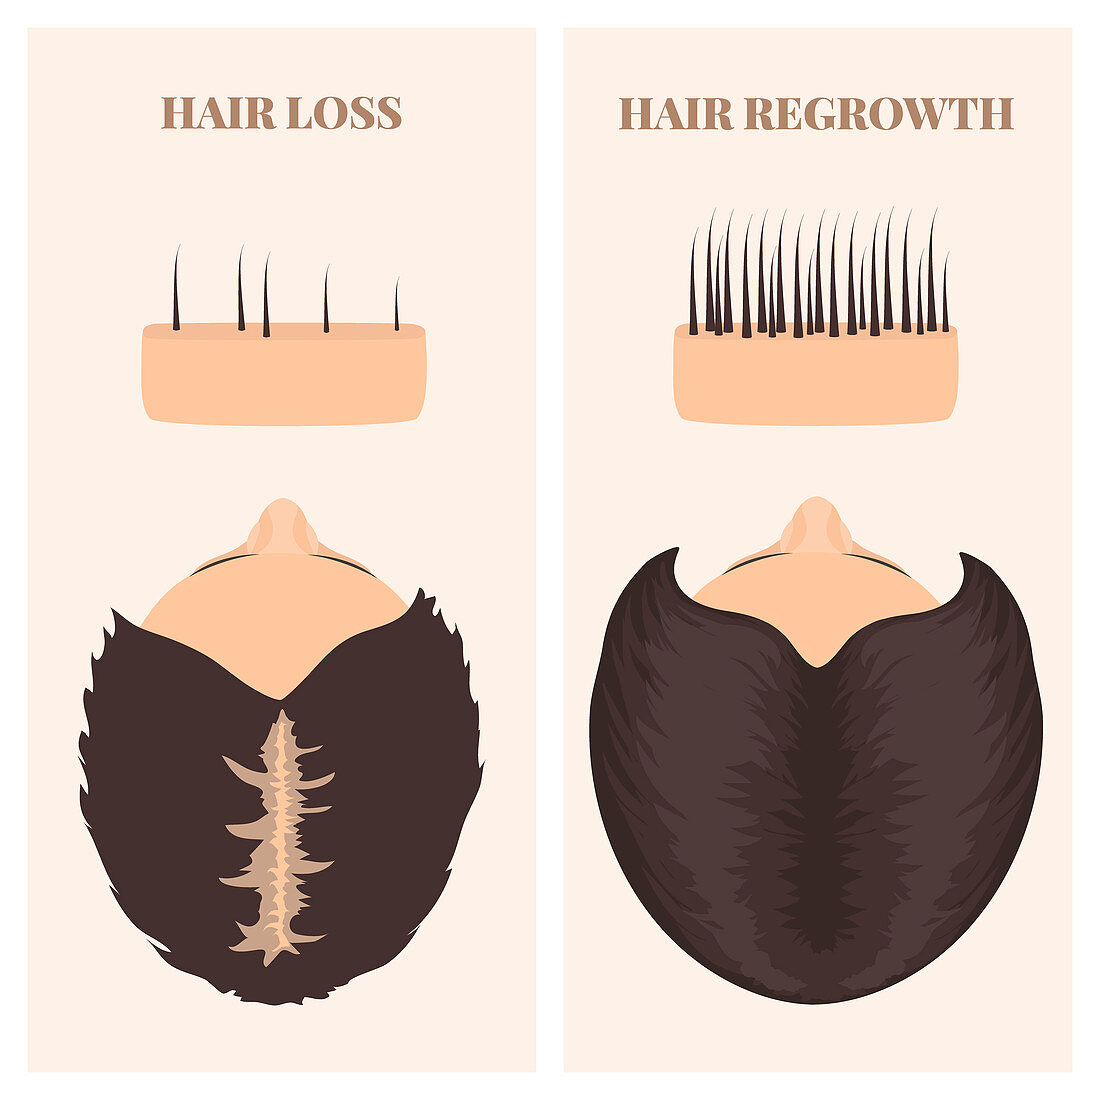 Woman before and after hair transplantation, illustration